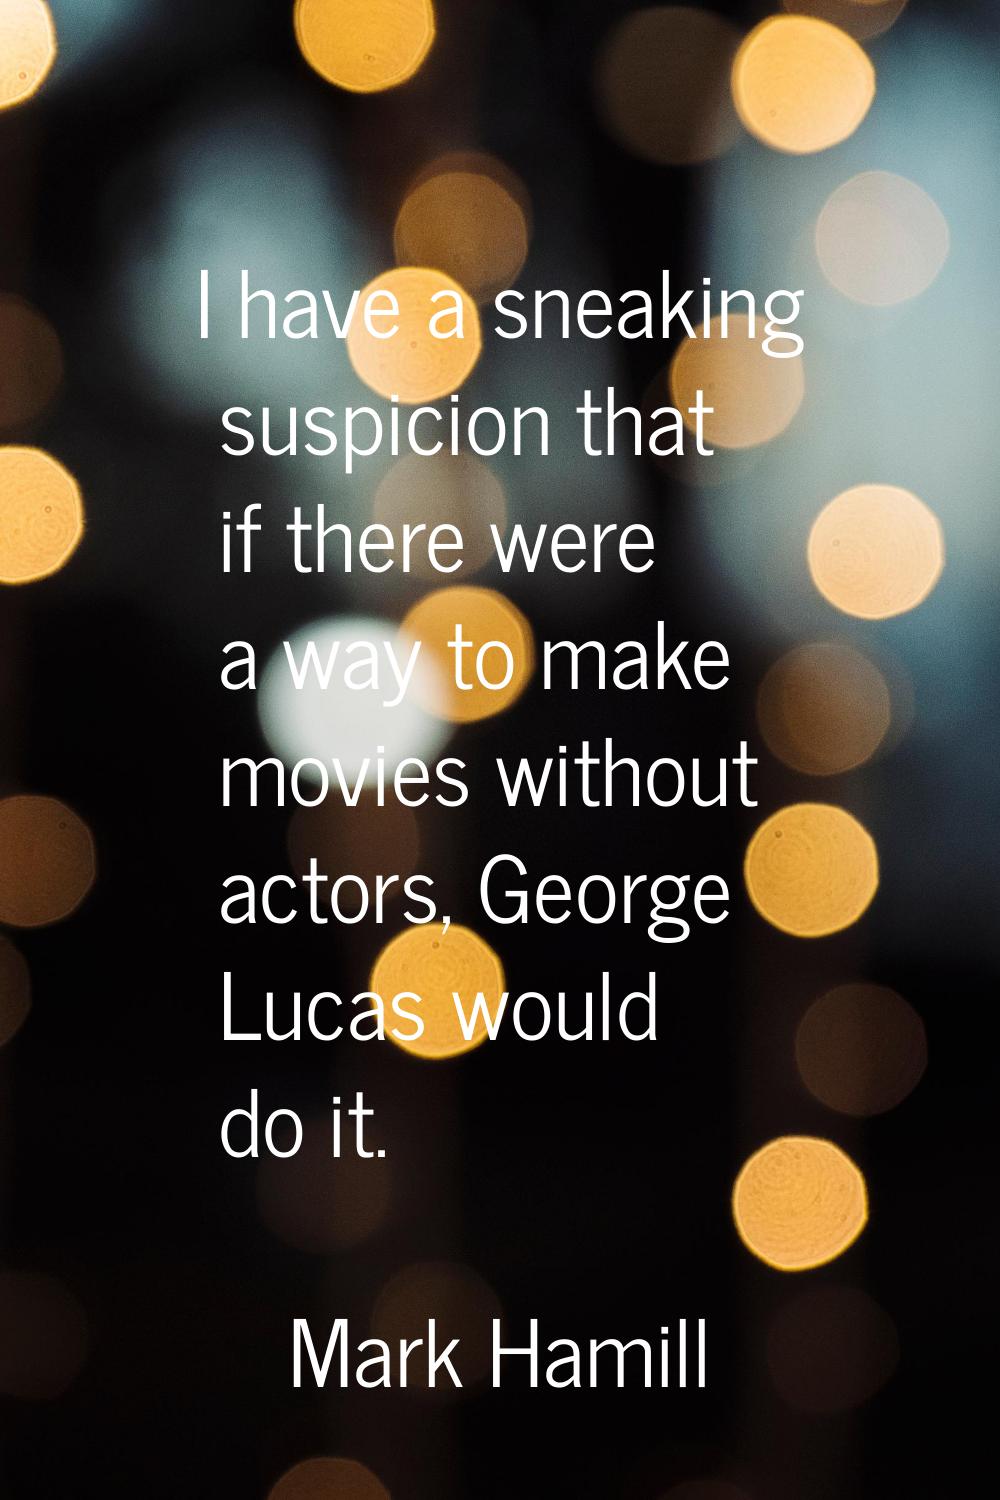 I have a sneaking suspicion that if there were a way to make movies without actors, George Lucas wo